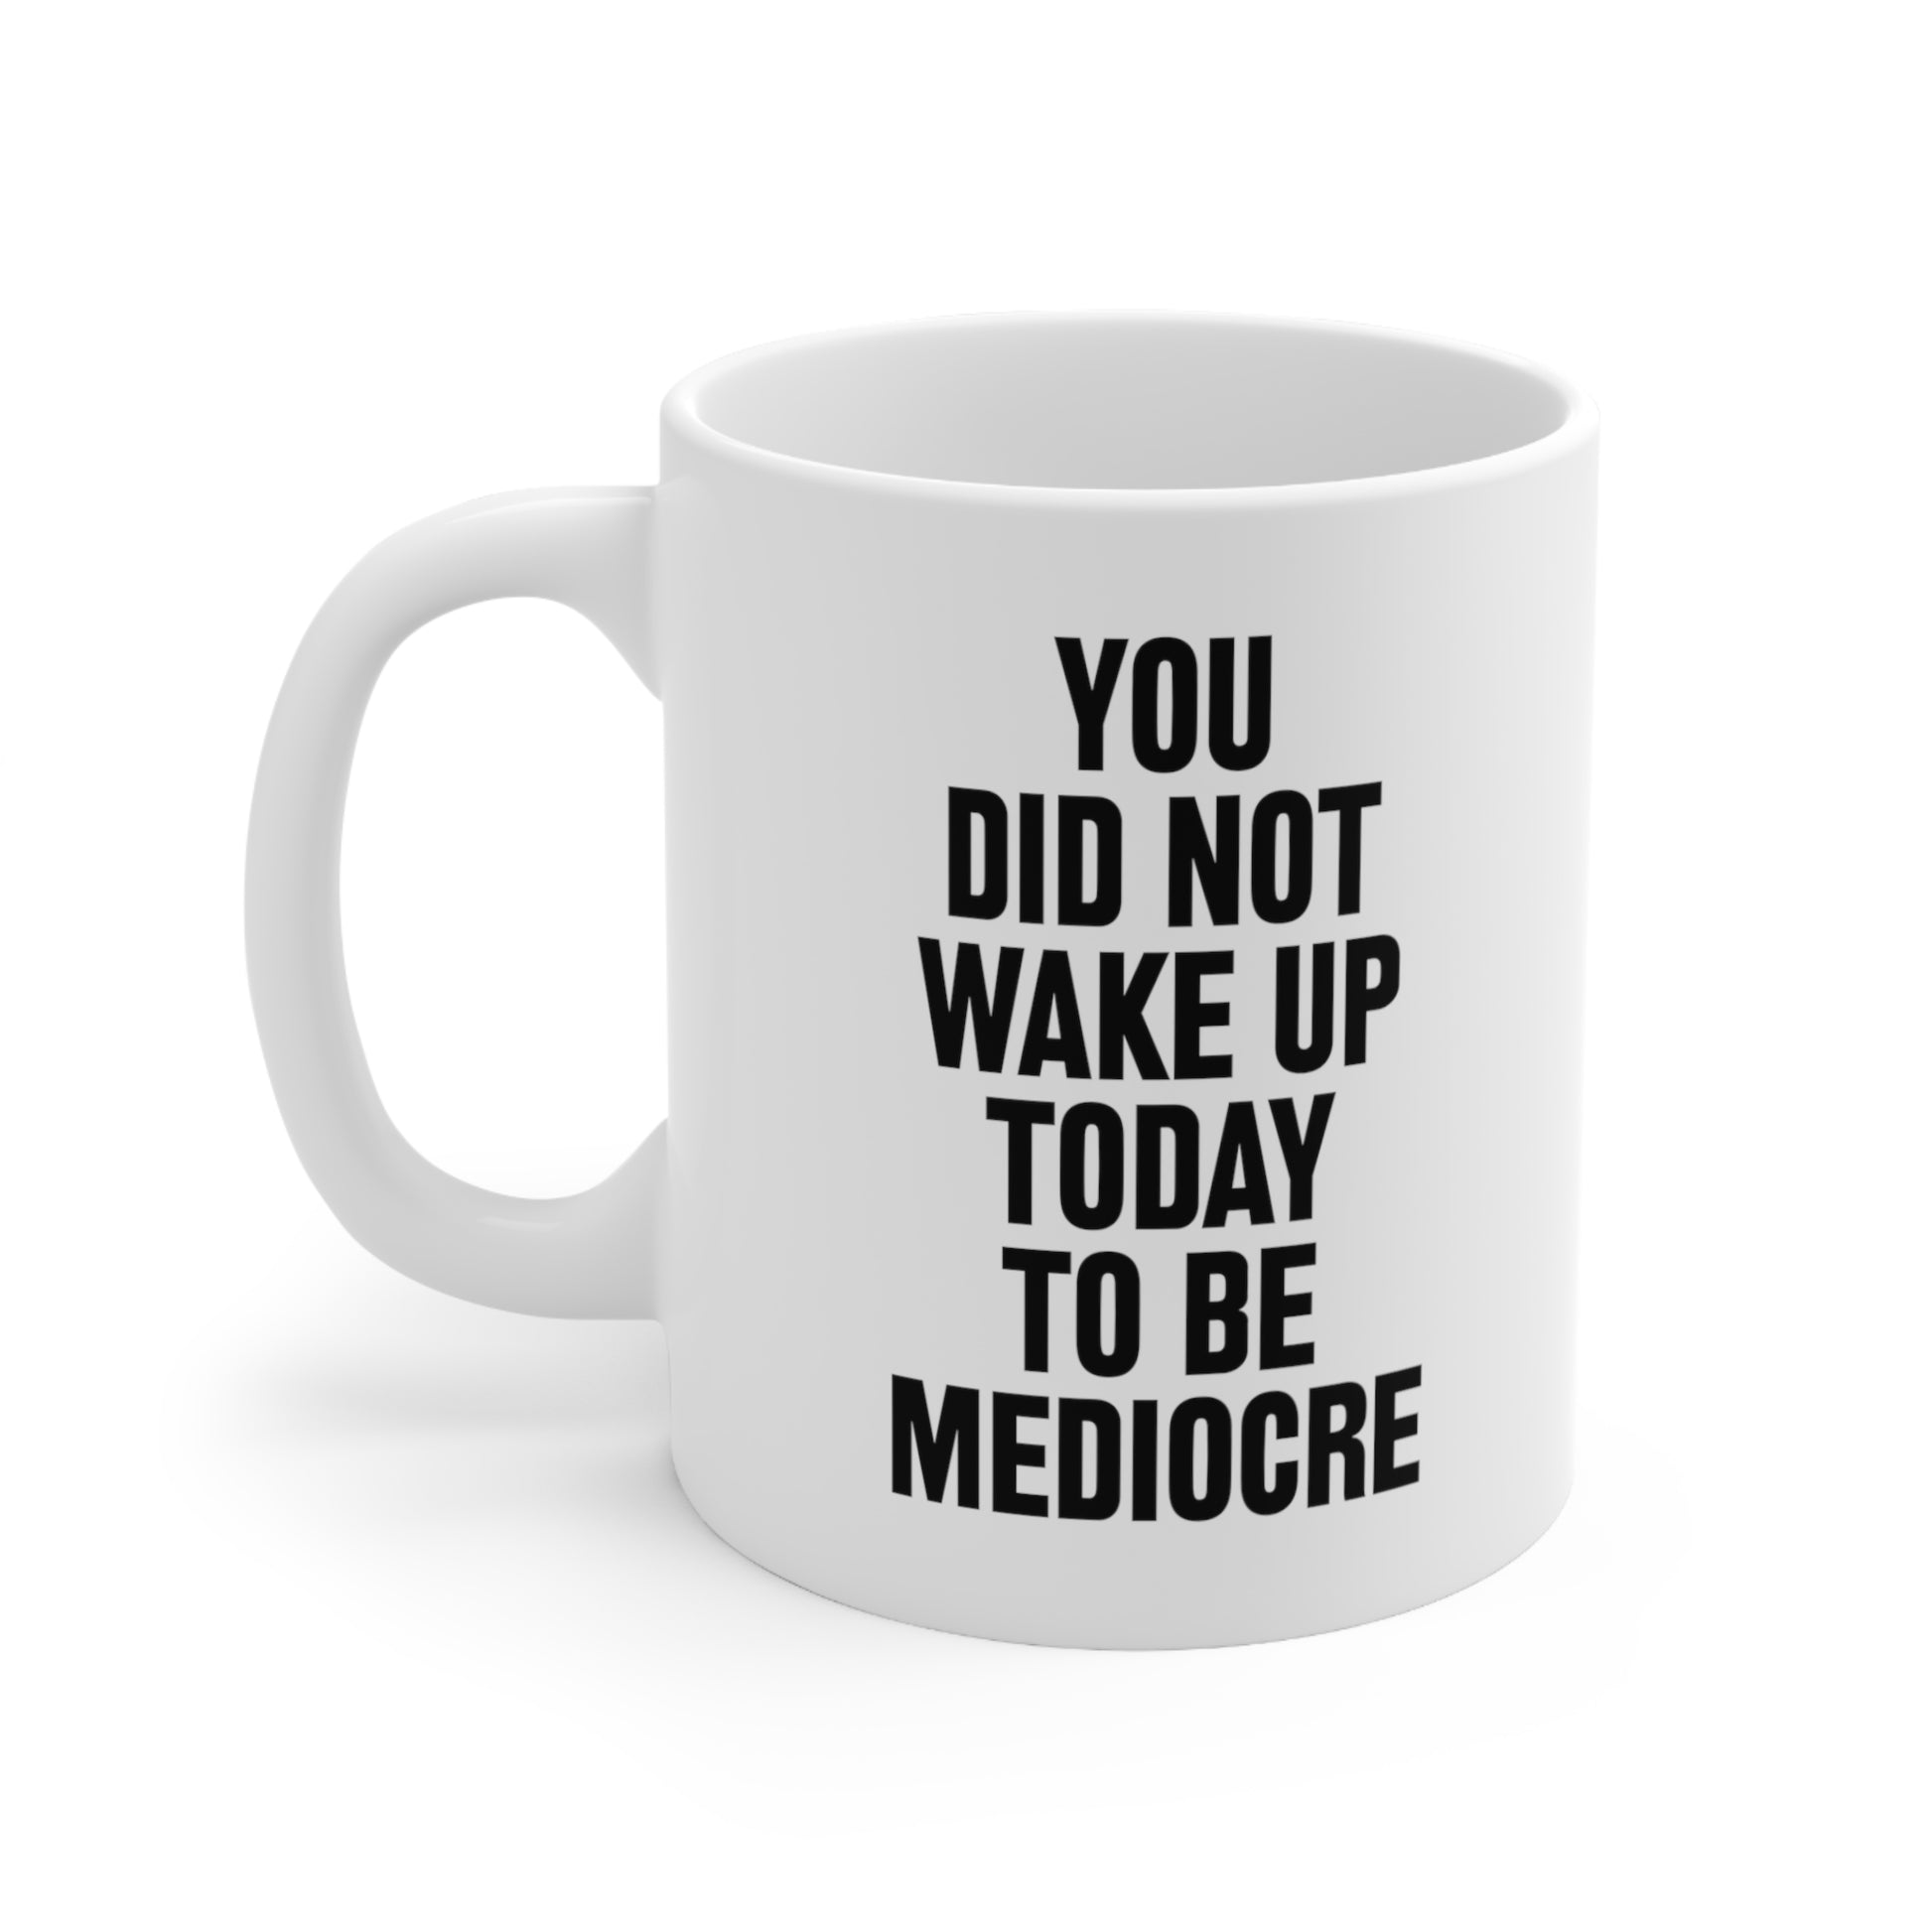 You did not wake up today to be mediocre Coffee Mug